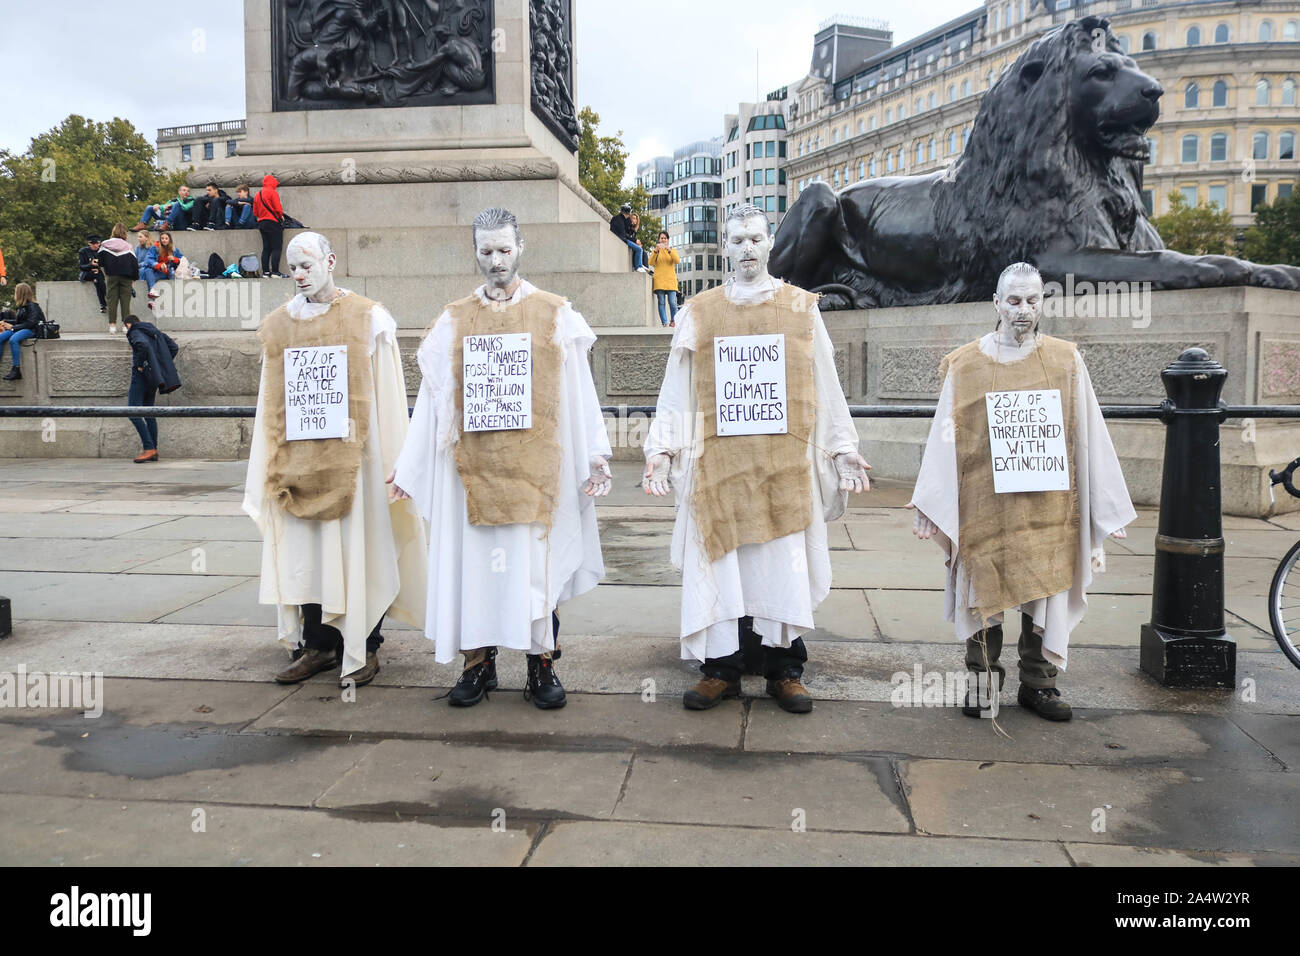 London, UK - 16 October 2019. Climate activists from Extinction rebellion stage a protest vigil in Trafalgar Square to demonstrate against section 14 of the public order act 1986 issued  by the Police banning protests. Extinction Rebellion has sought a judicial review to challenge a London-wide protest ban in the High courts Credit: amer ghazzal/Alamy Live News Stock Photo